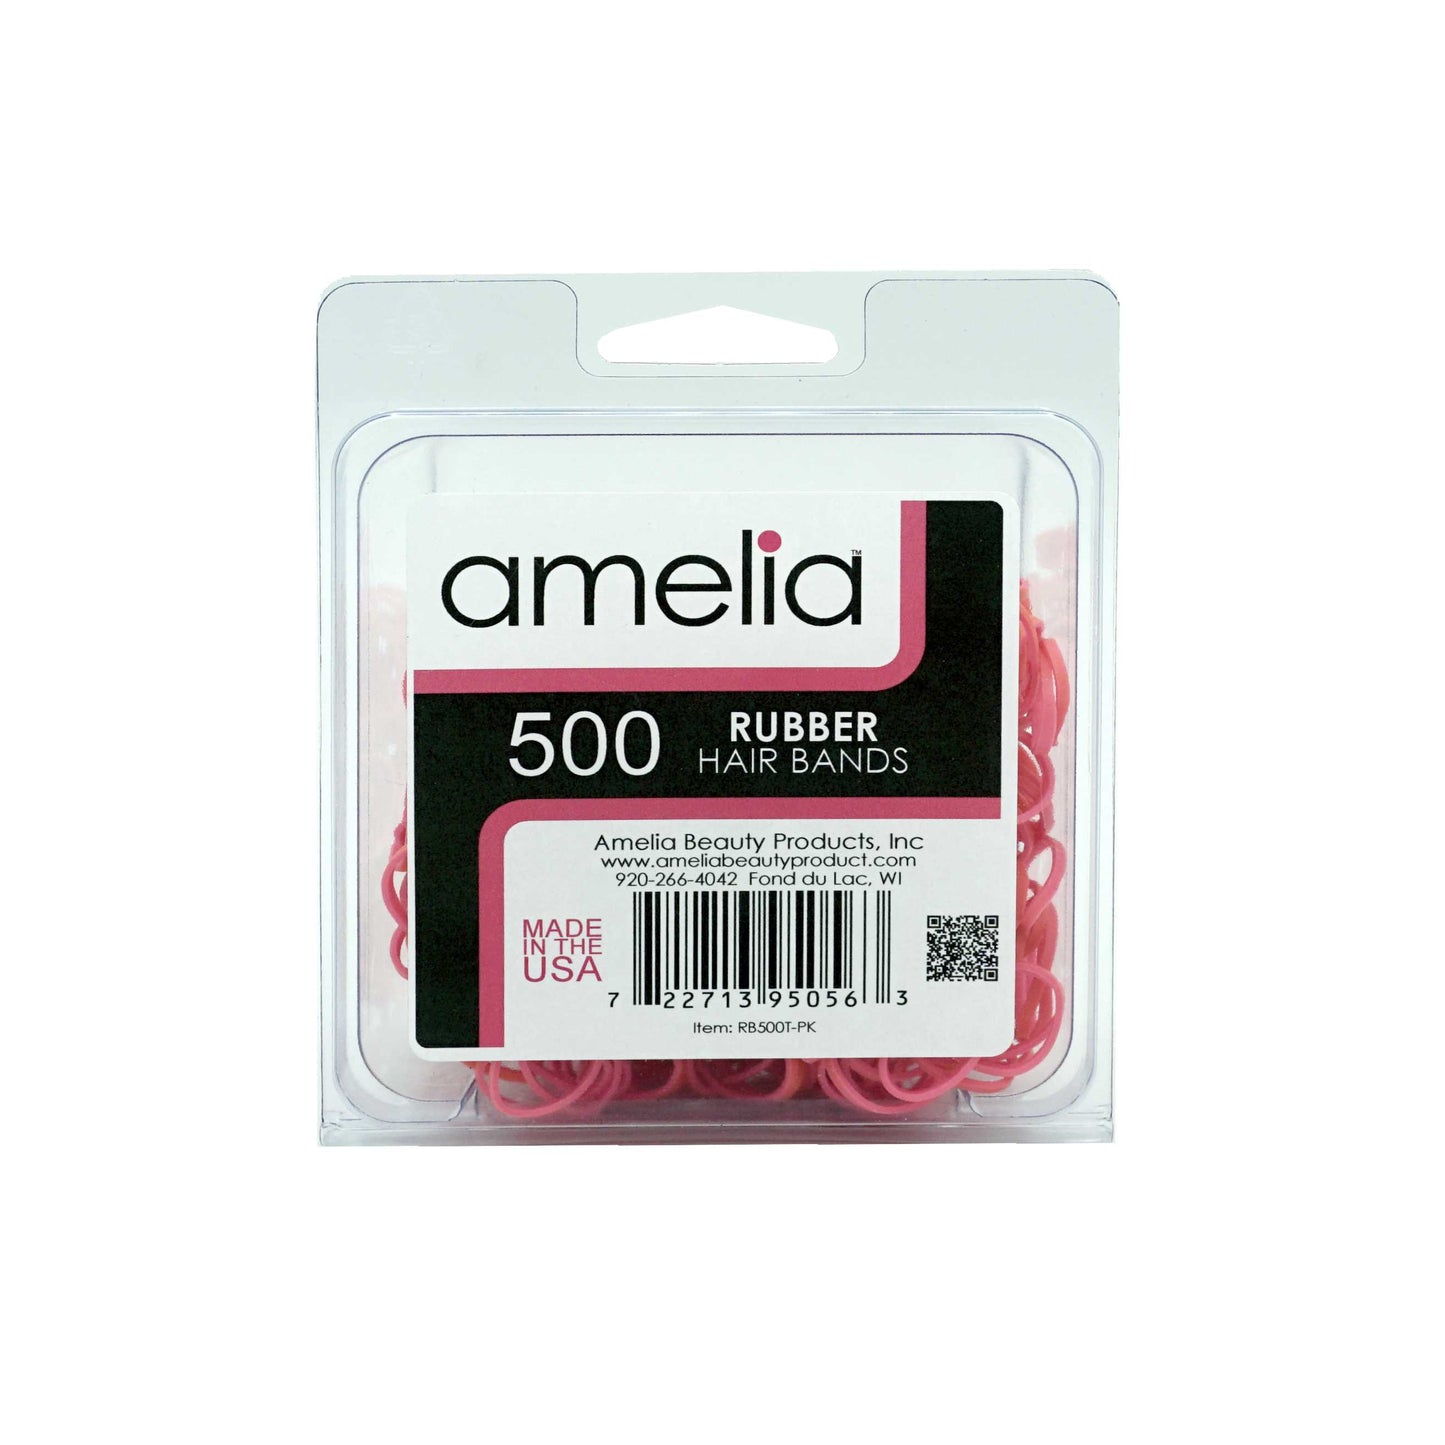 Amelia Beauty | 1/2in, Pink, Elastic Rubber Band Pony Tail Holders | Made in USA, Ideal for Ponytails, Braids, Twists, Dreadlocks, Styling Accessories for Women, Men and Girls | 500 Pack